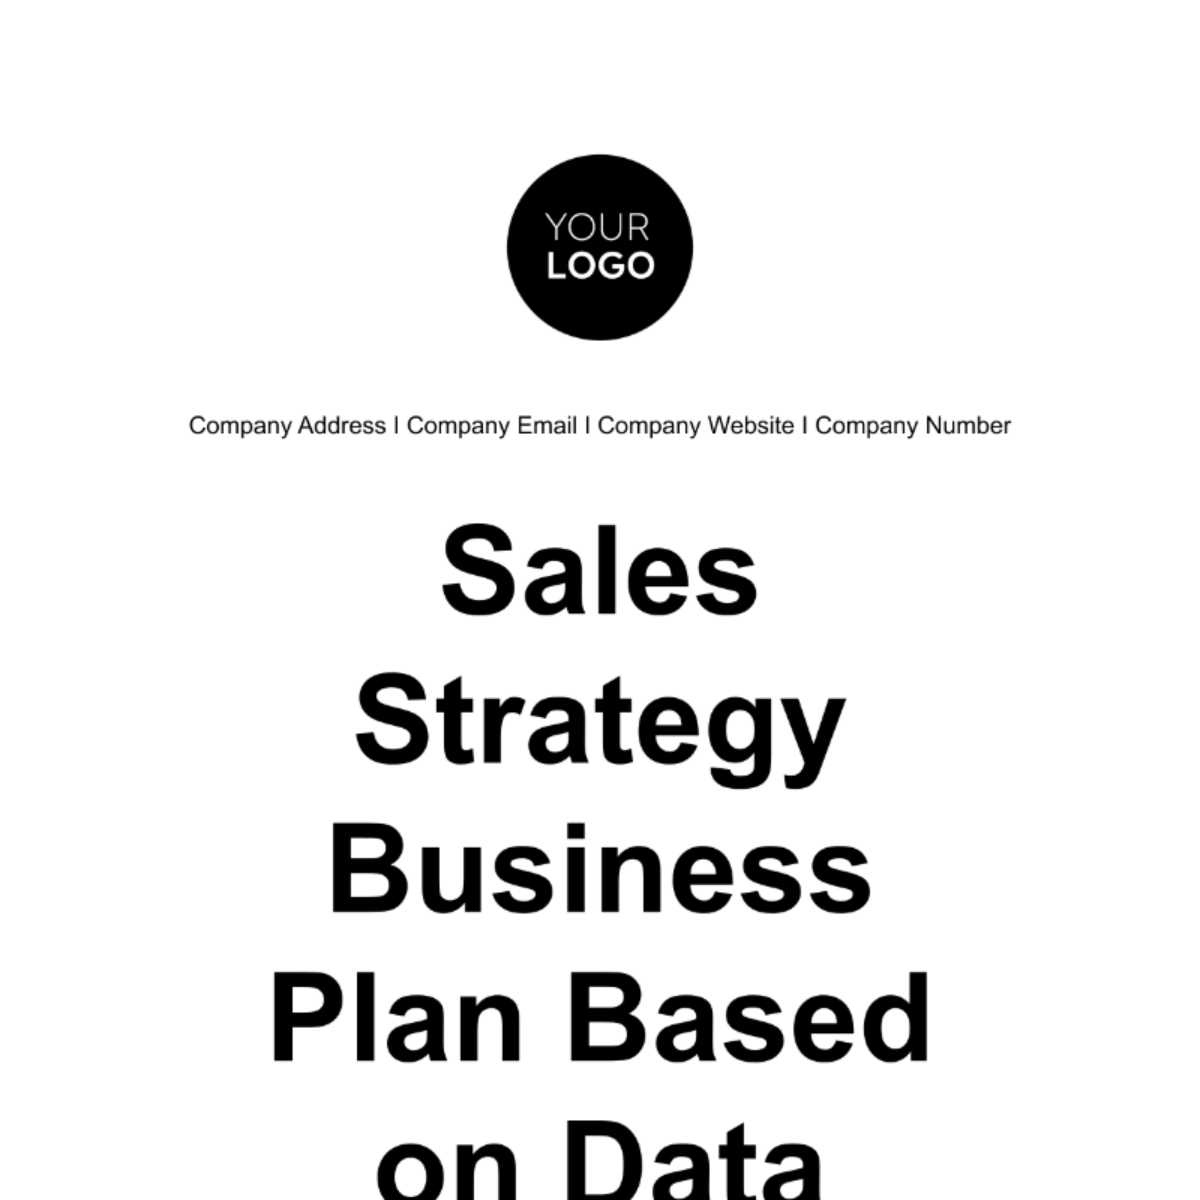 Free Sales Strategy Business Plan Based on Data Template